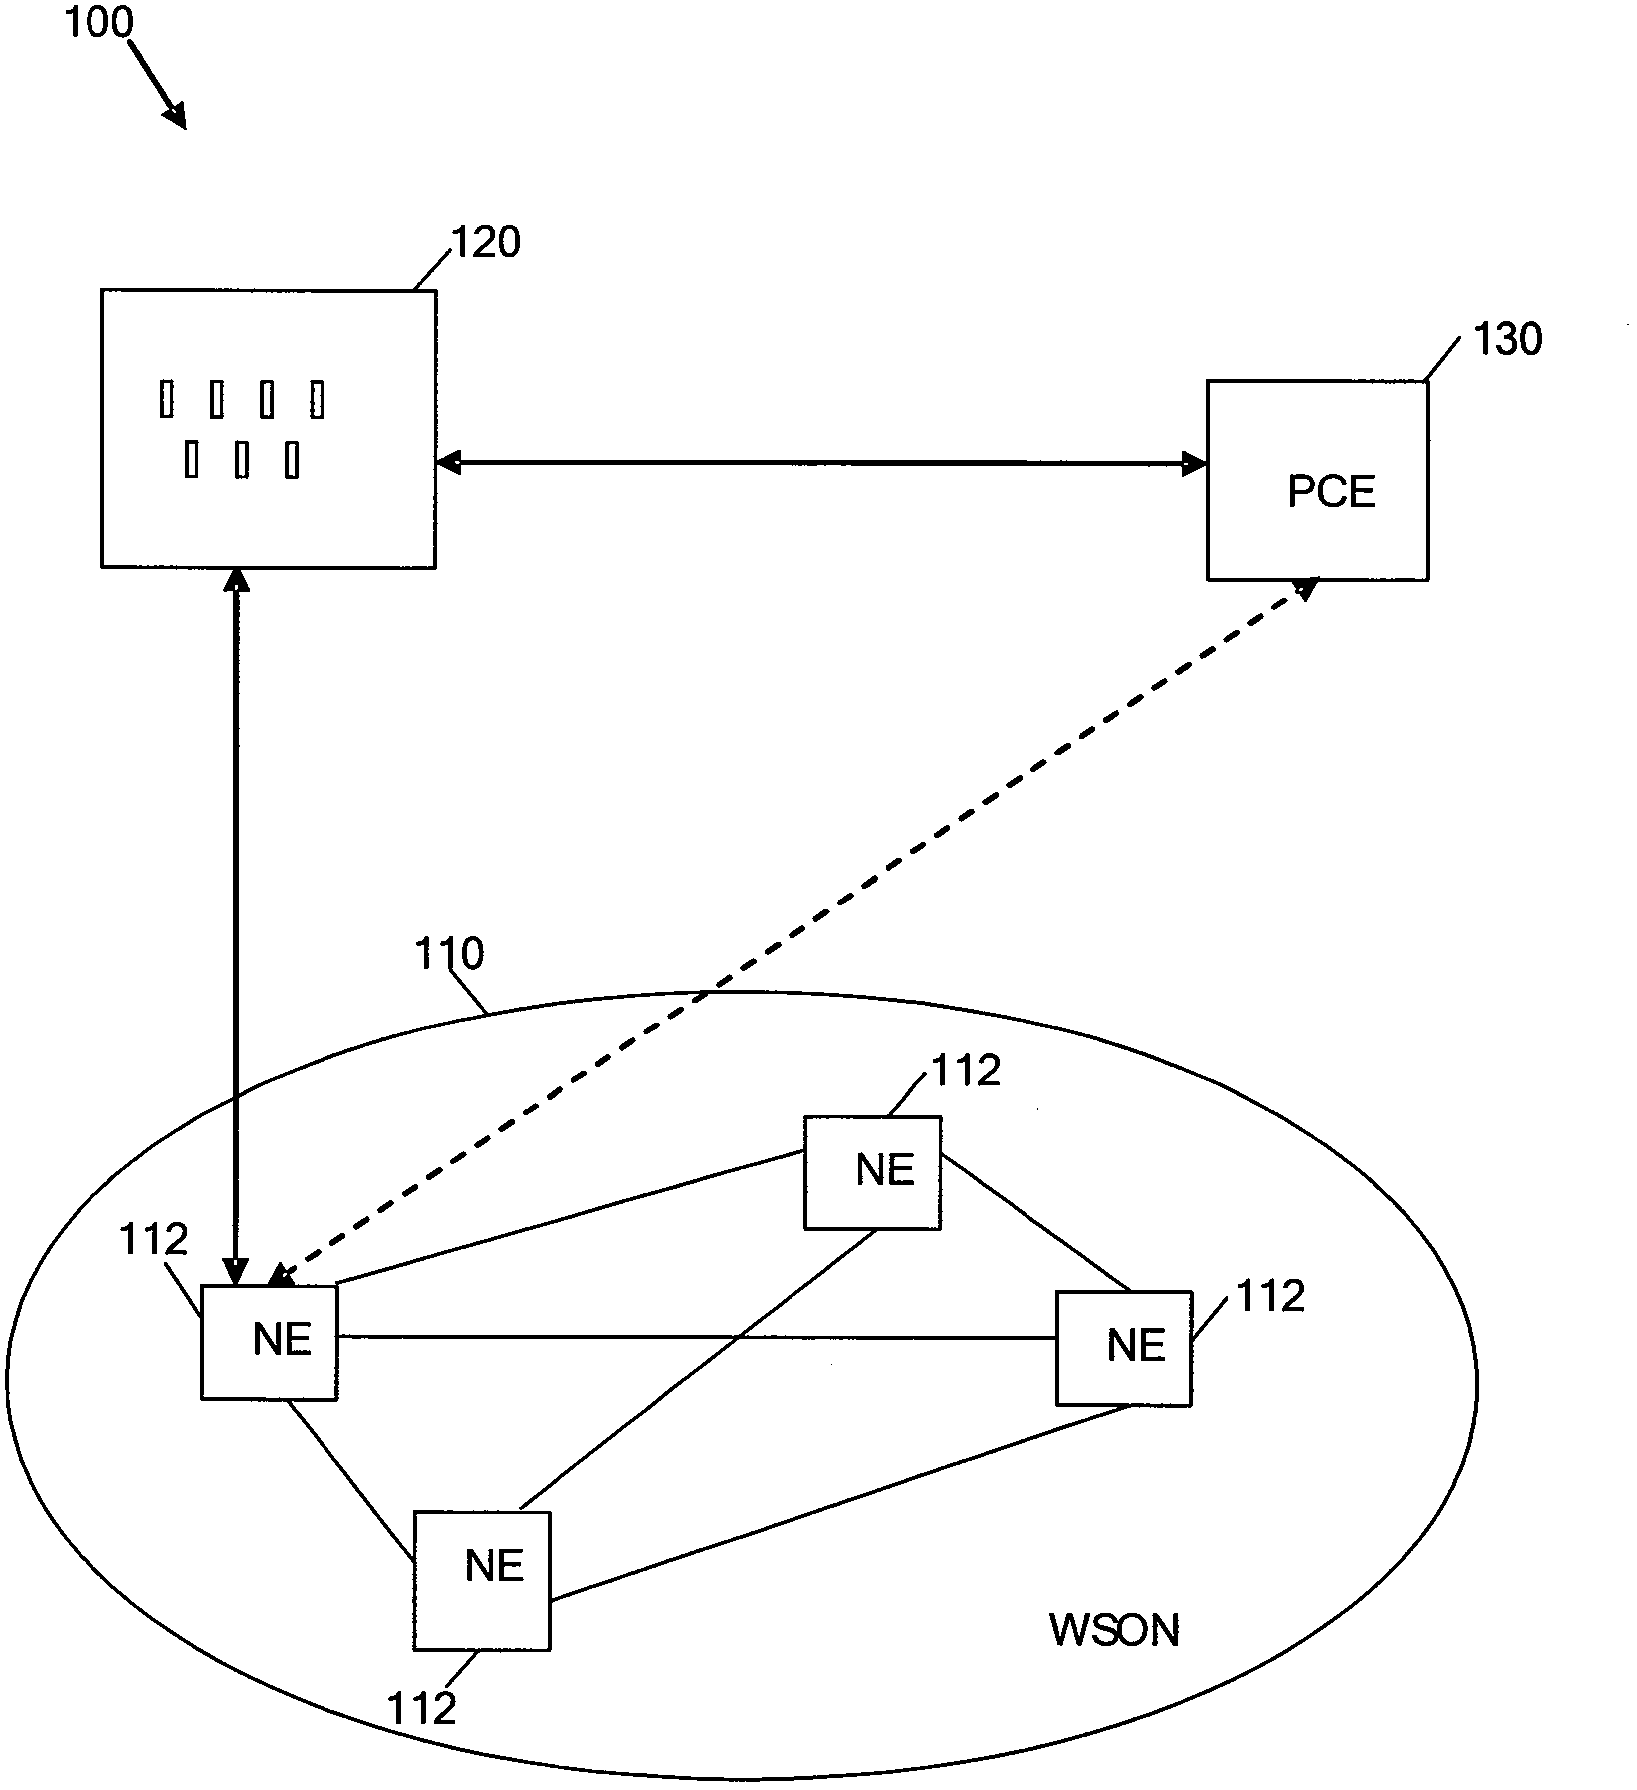 Path computation element protocol (PCEP) operations to support wavelength switched optical network routing, wavelength assignment, and impairment validation